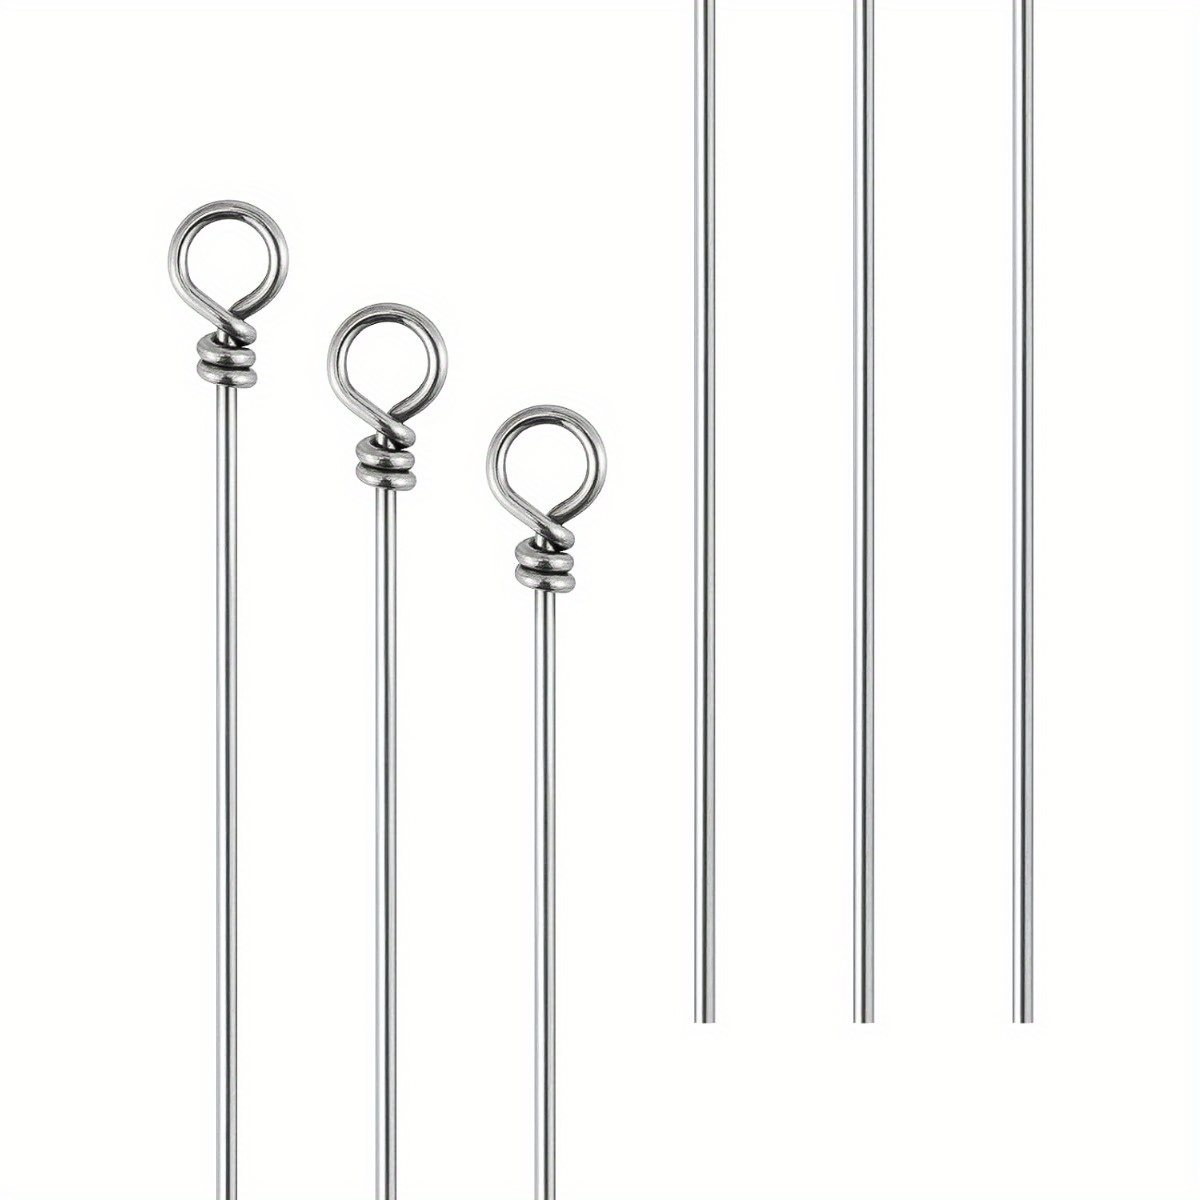 

100pcs Stainless Steel Fishing Looped Spinner Shaft For Lure Making, Freshwater Saltwater Fishing Accessories For Bass Trout Walleye Salmon Catfish